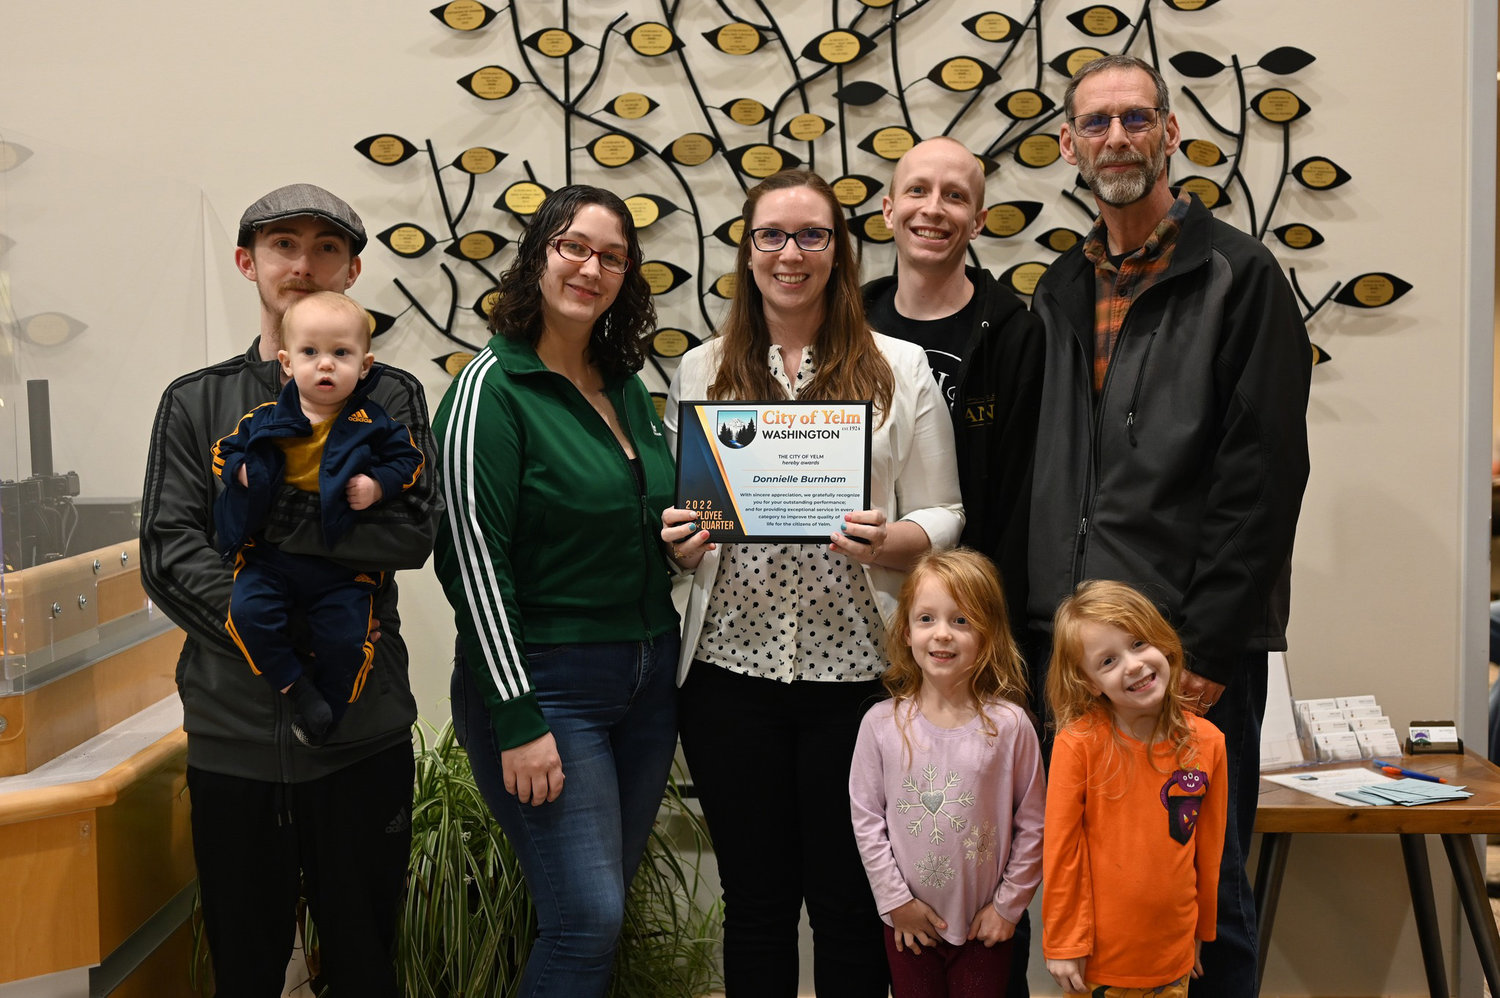 Donni Burnham poses with her family after she was named Yelm’s Employee of the Quarter.